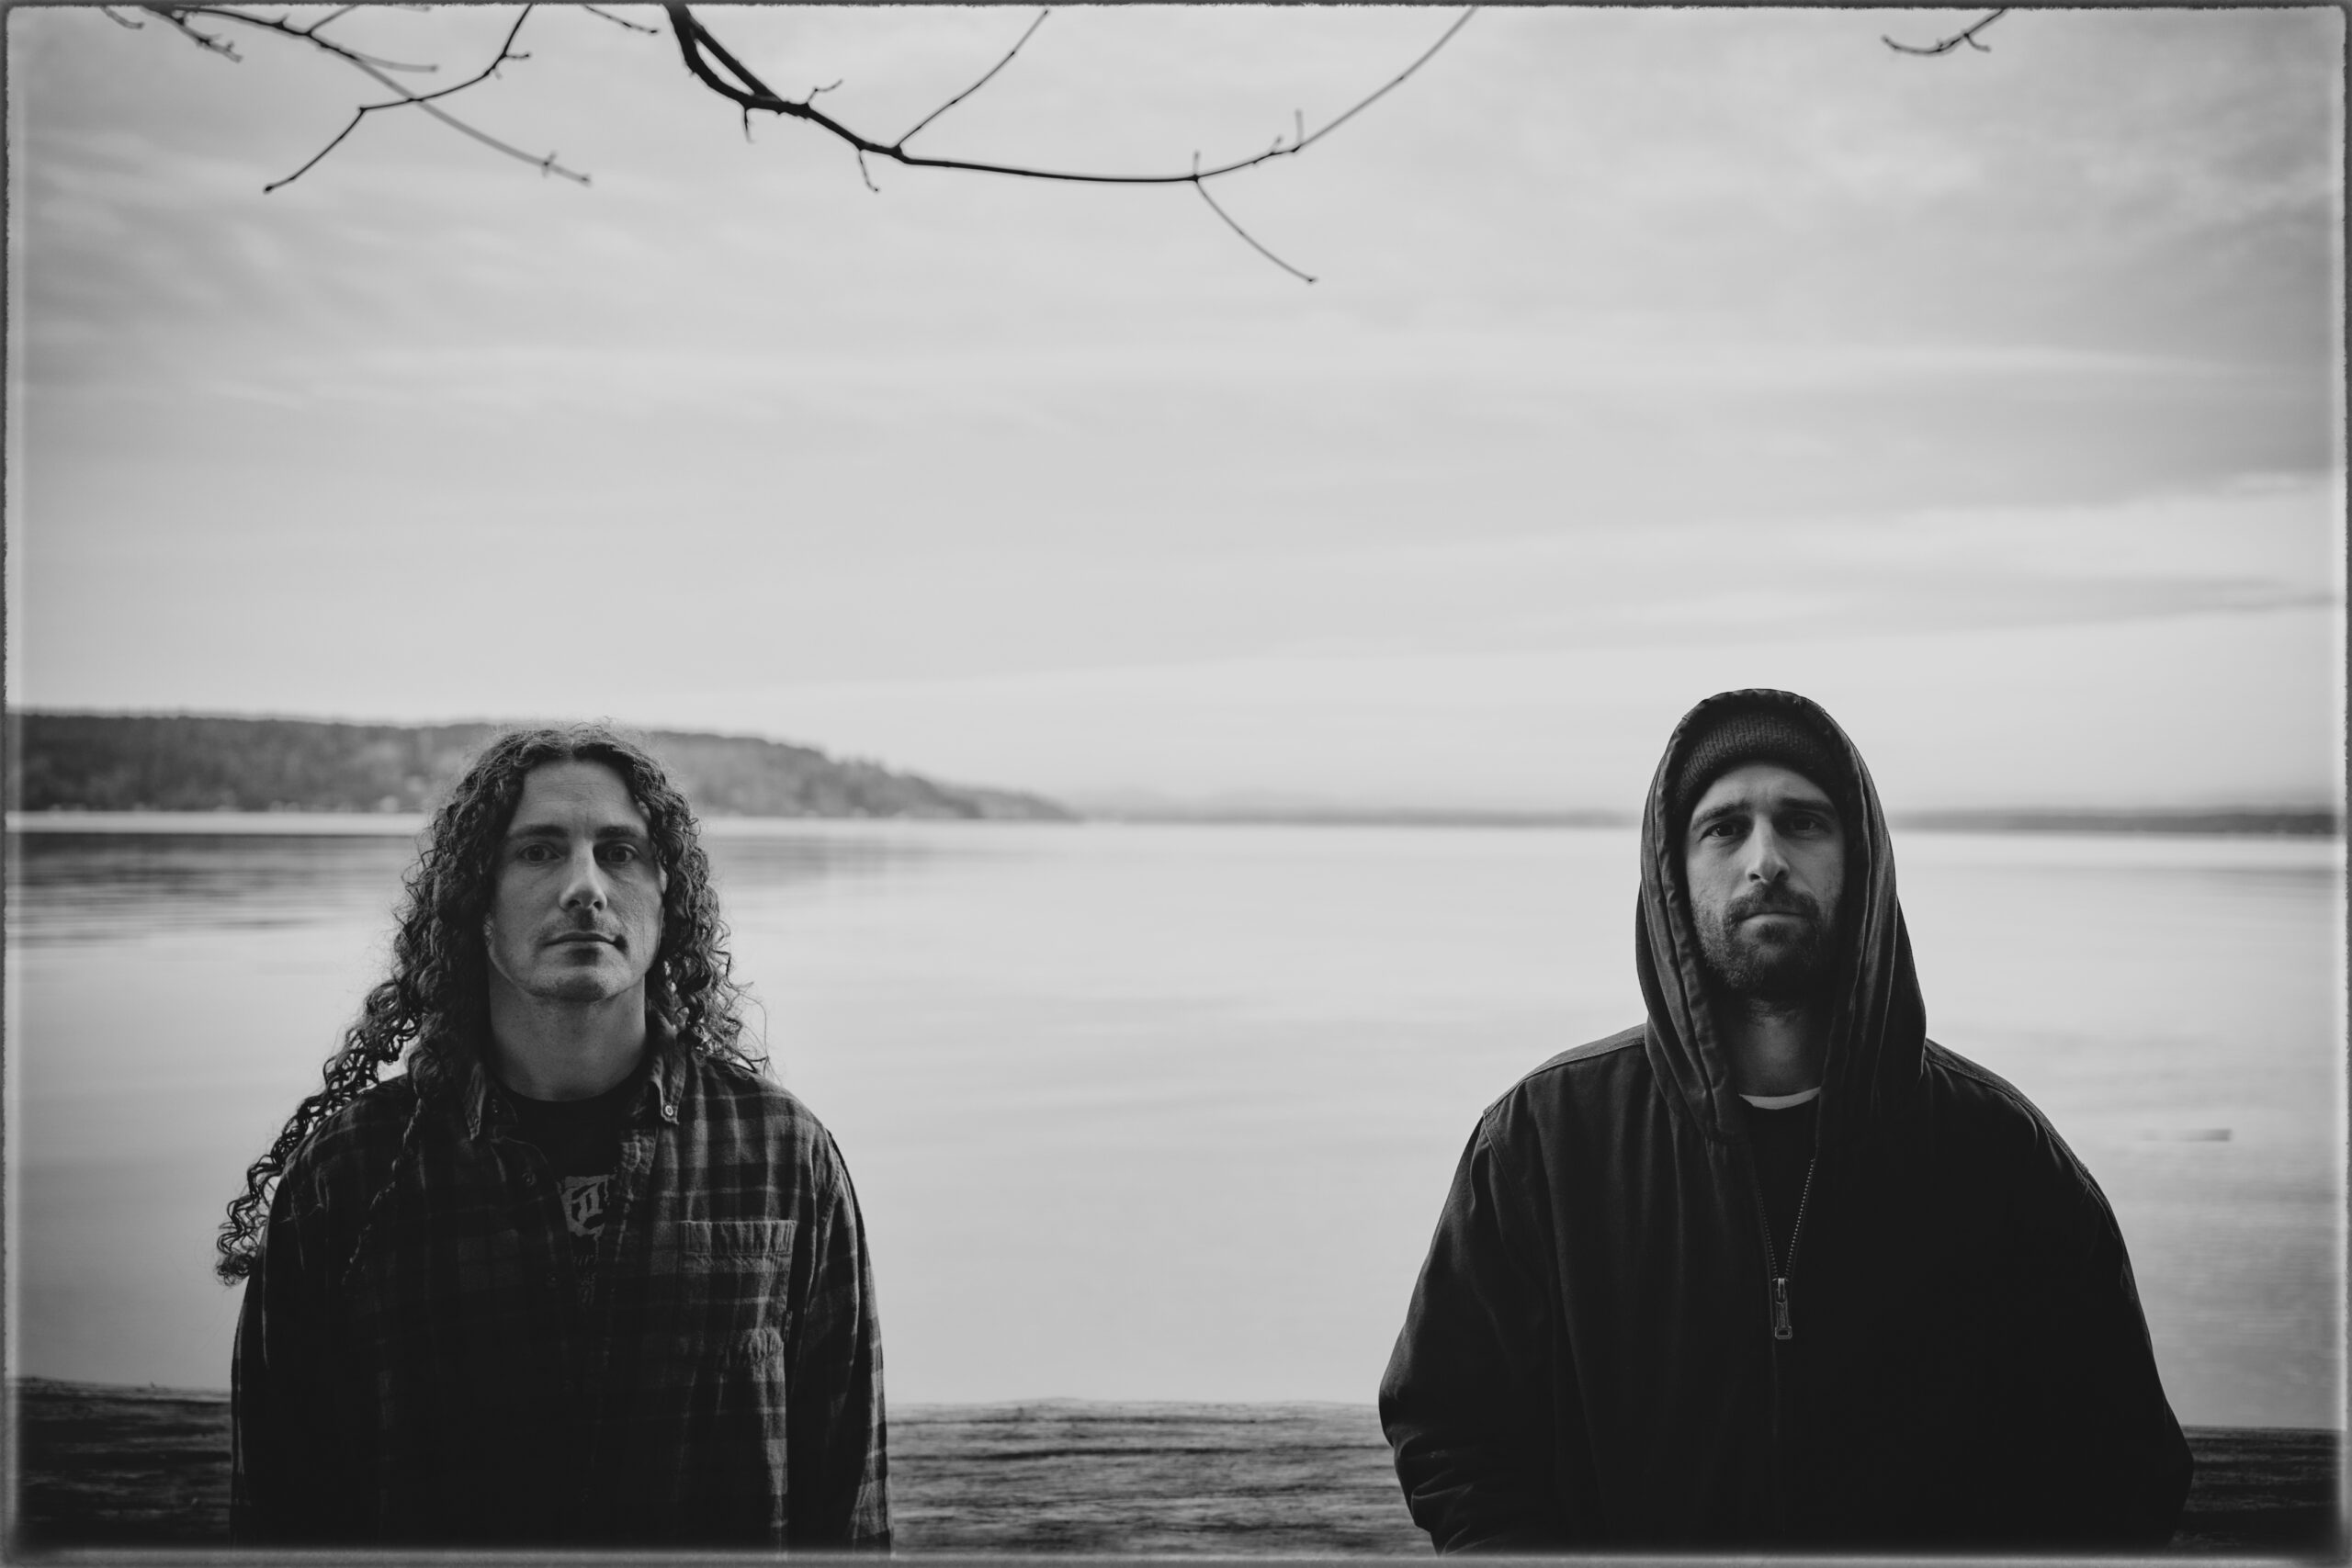 Bell Witch and Spirit Possession bring funeral doom and black metal to Boggs